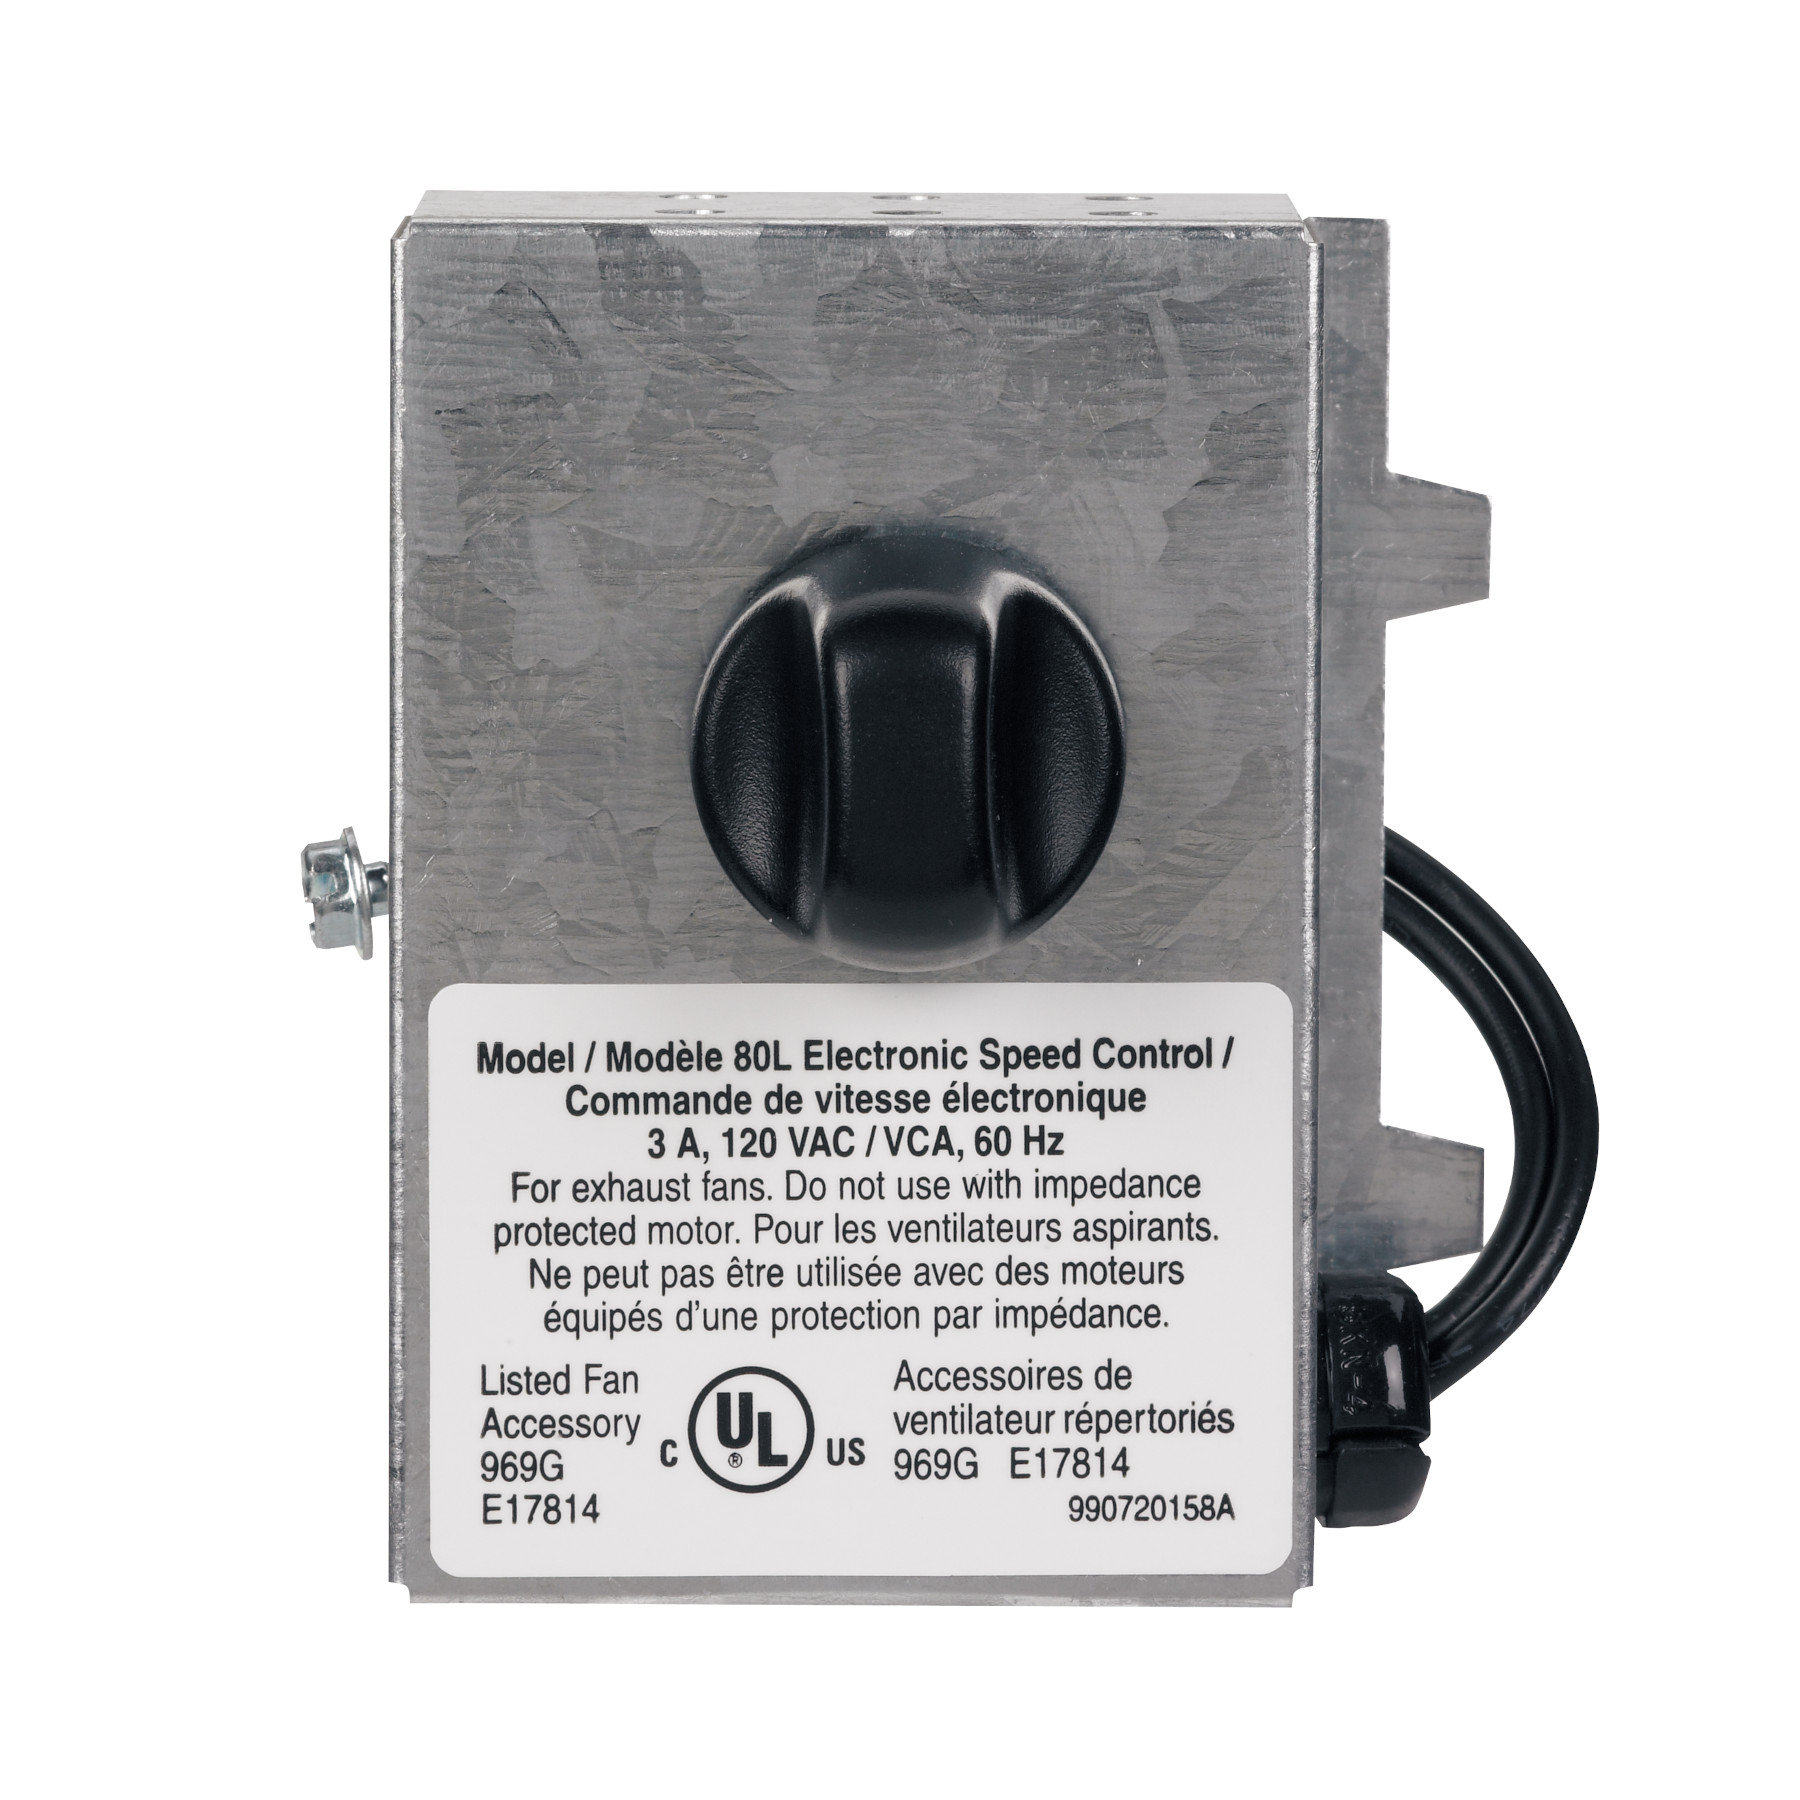 Variable Speed Control, 3.0 Amp, 120 Volts, 60 Hz (may be used with select models)